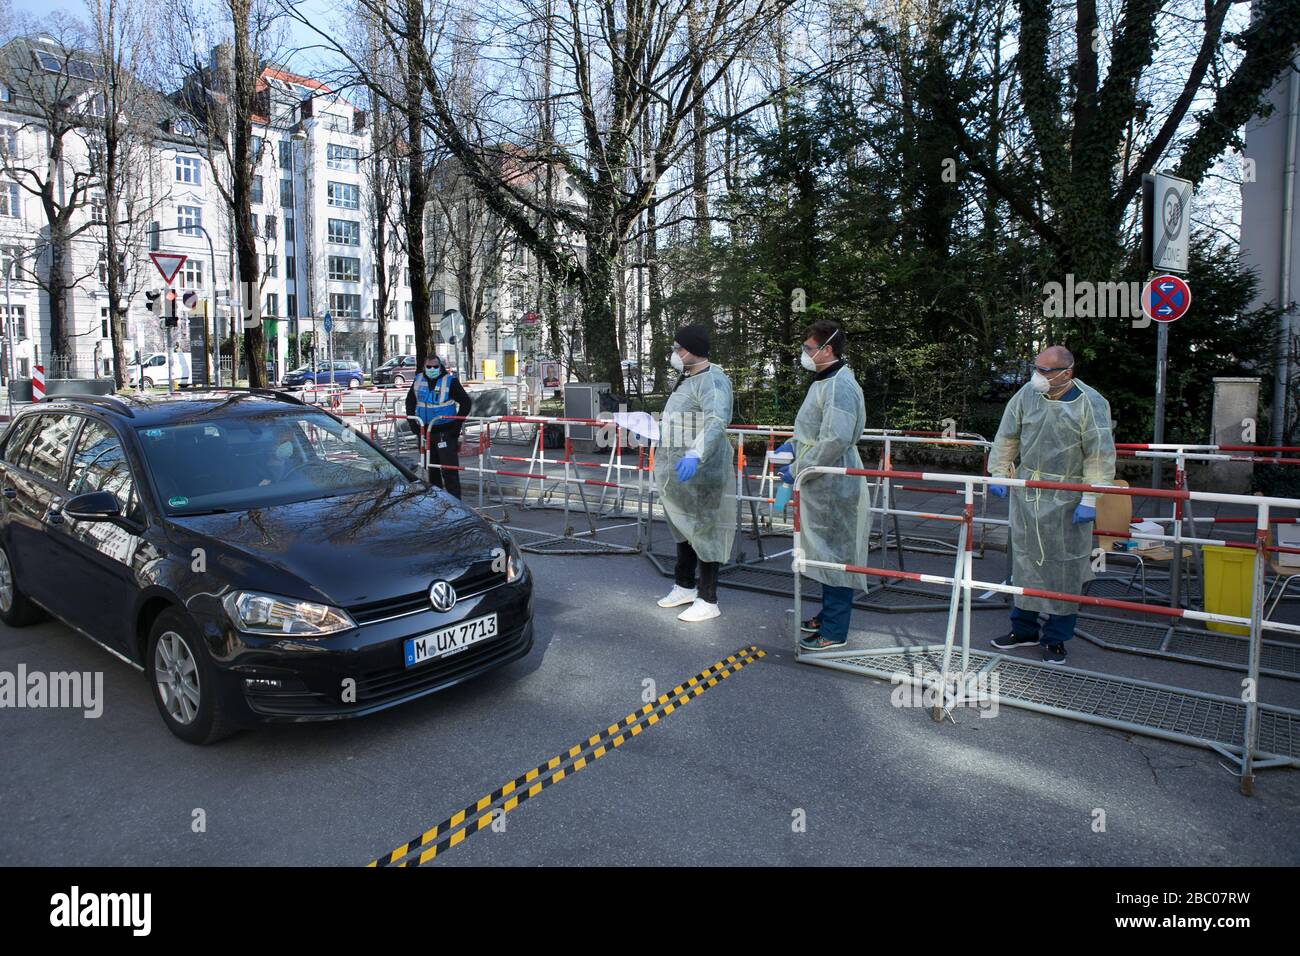 Start of the drive-in/walk-through test station for suspected corona in people in system-critical professions, operated by the Tropical Institute at the LMU Clinic in Georgenstraße. The picture shows a female driver in her car being tested by means of a nasal swab. [automated translation] Stock Photo